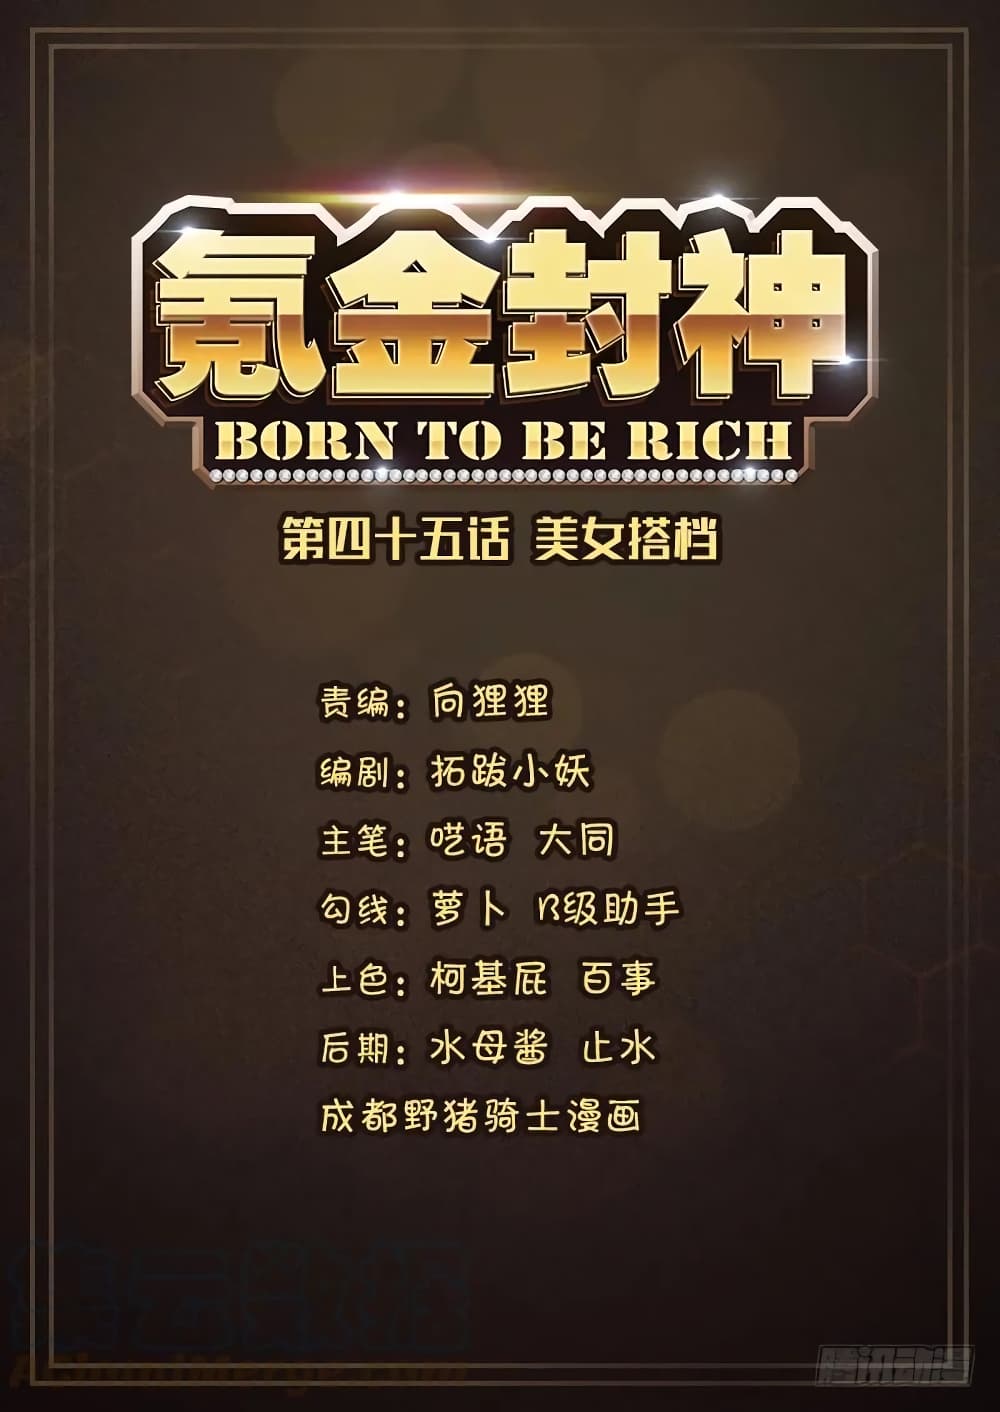 Born To Be Rich 46 (2)